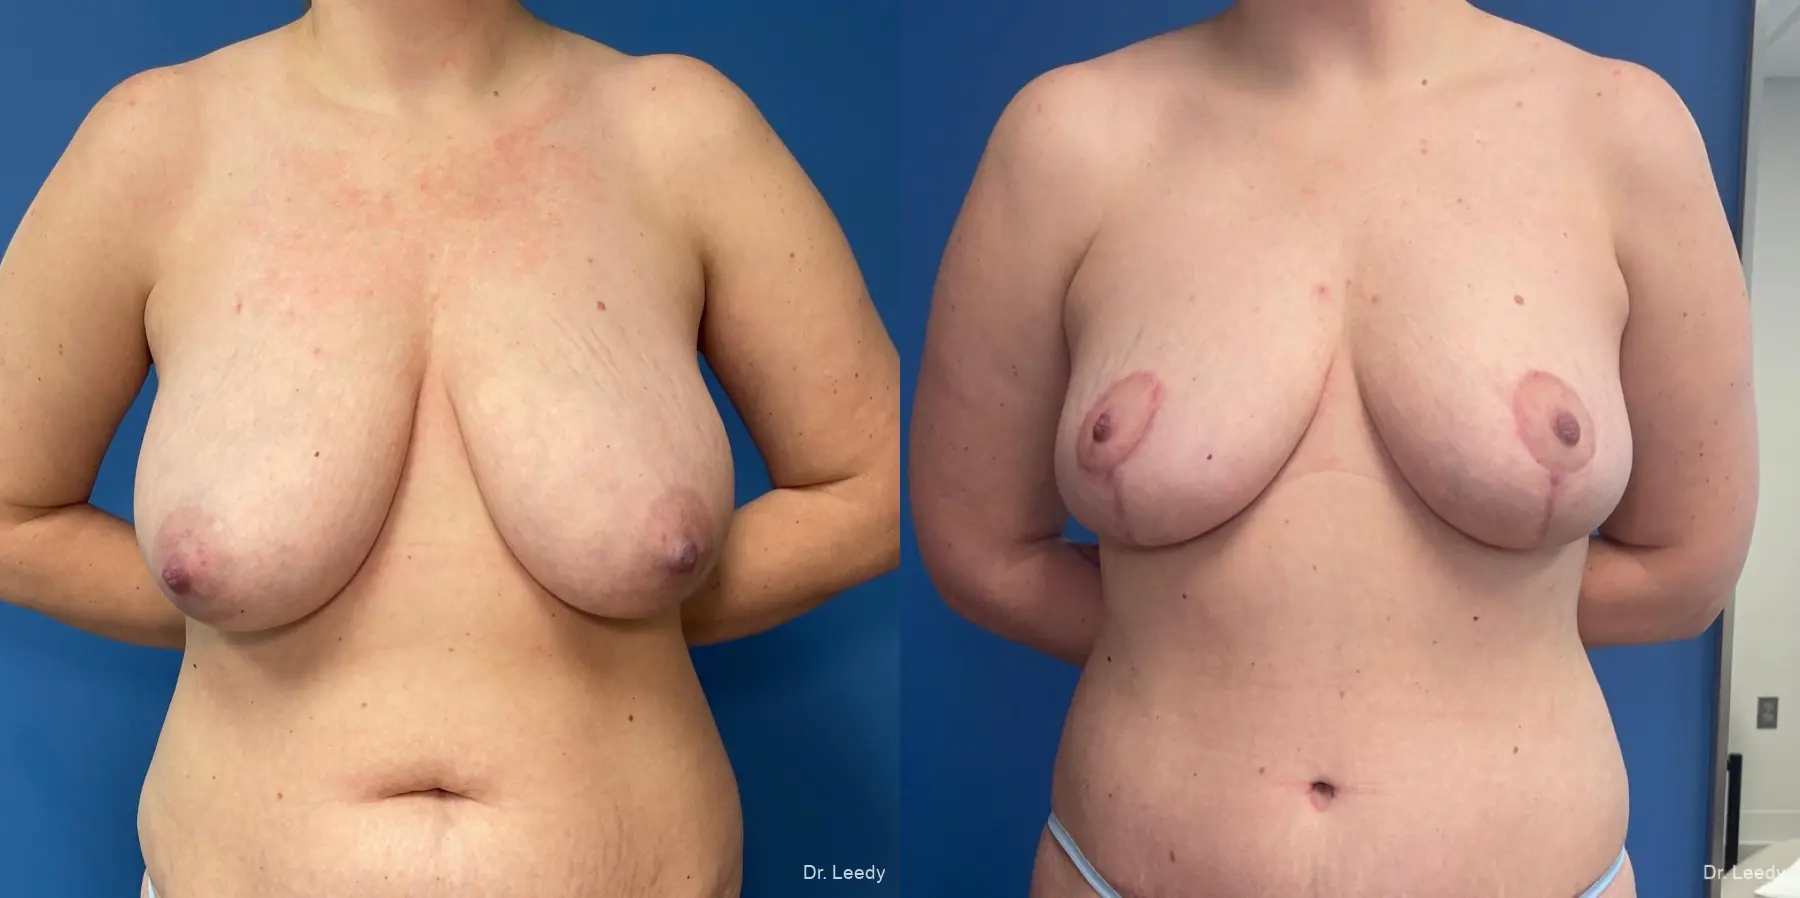 Mastopexy: Patient 2 - Before and After  